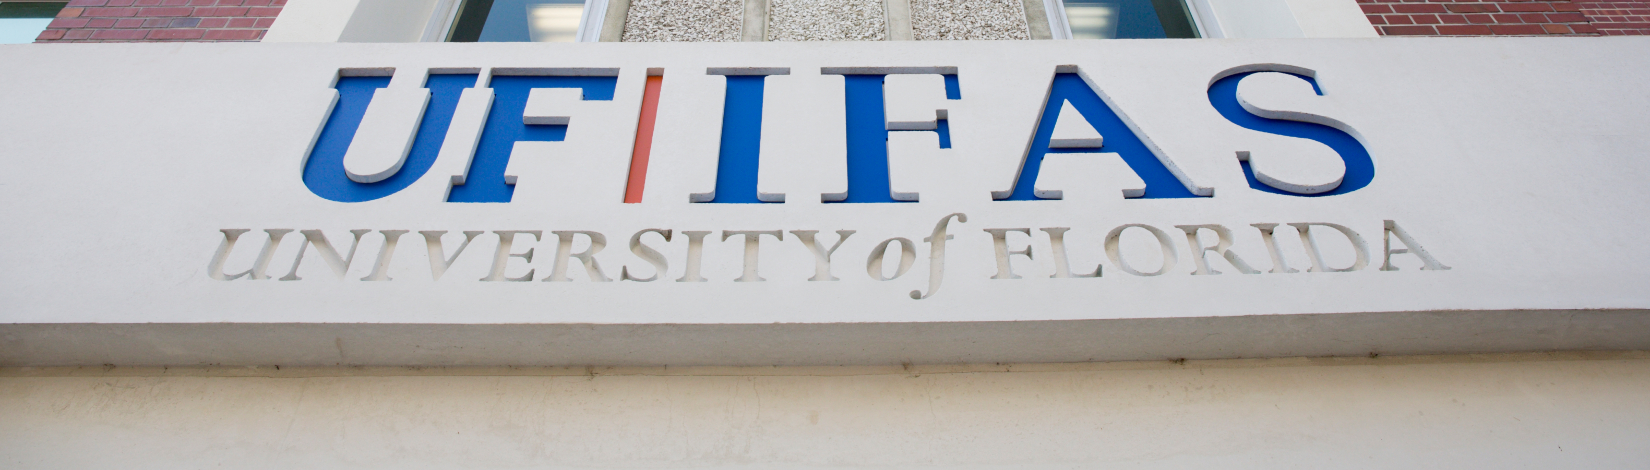 close up view of UF IFAS sign on building